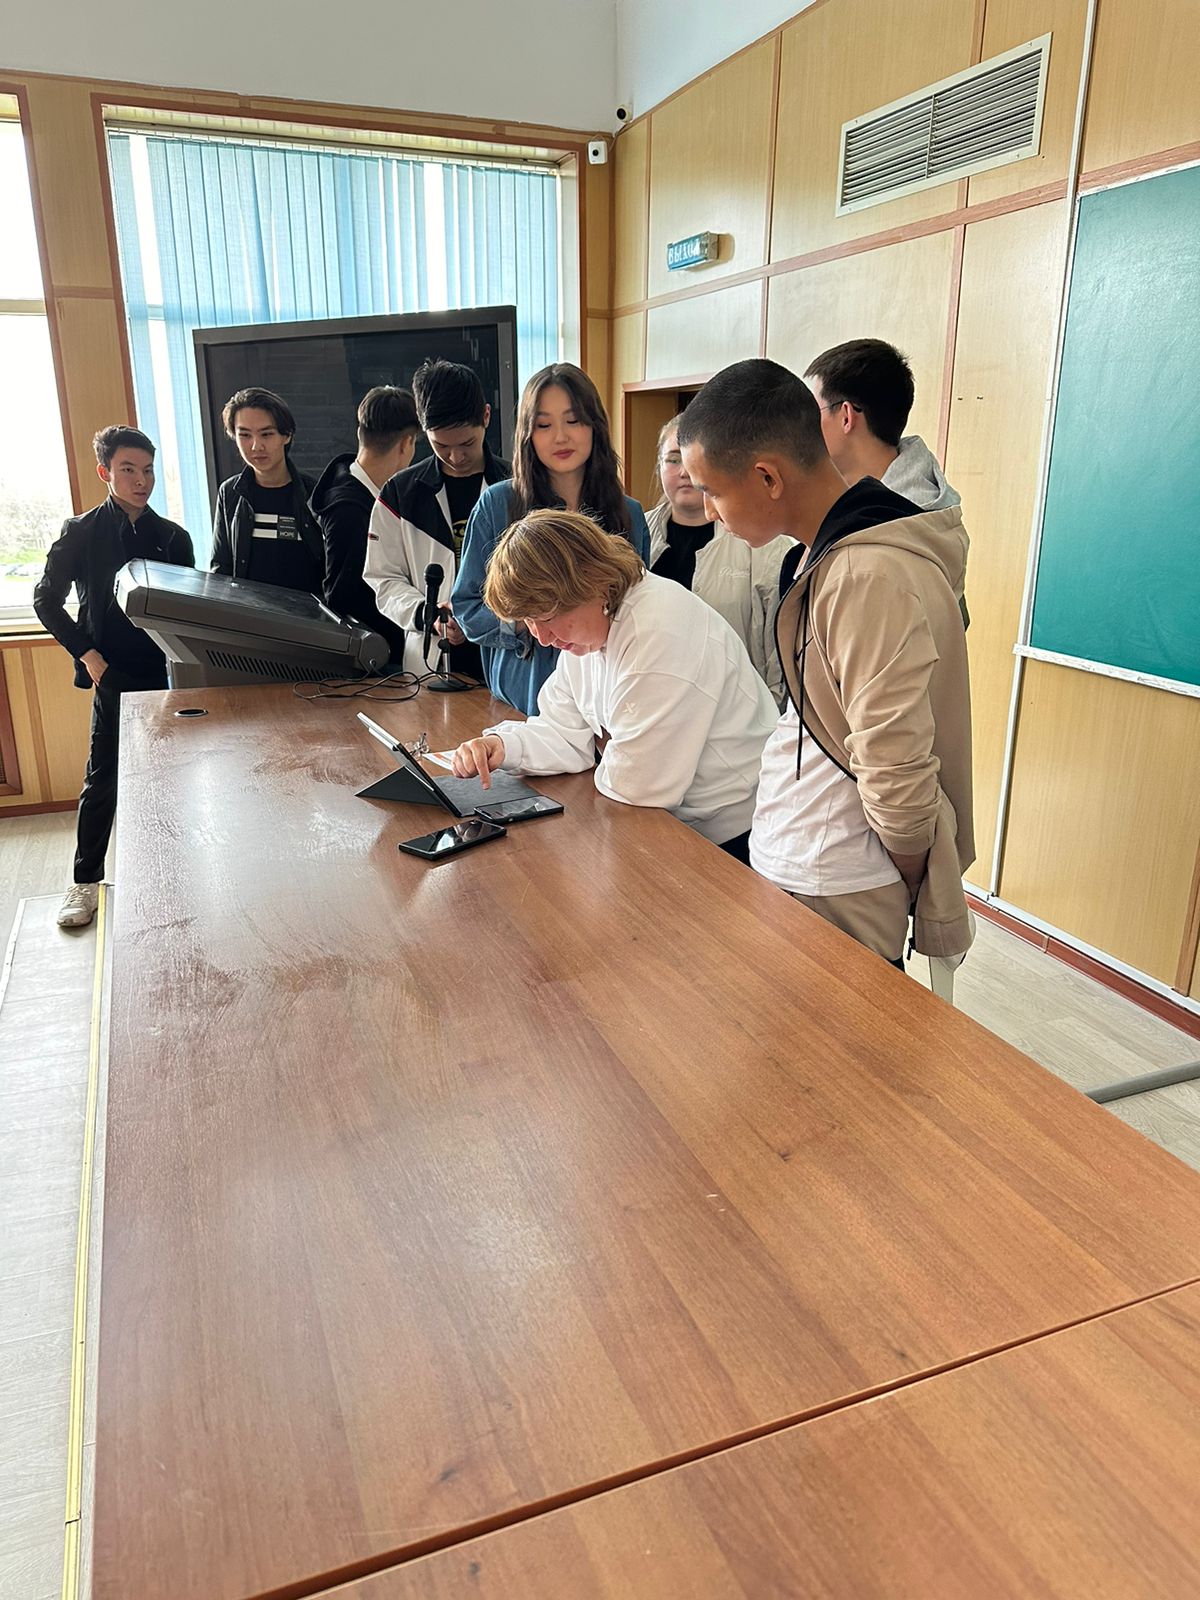 Representatives of "Otbasy bank" met with students of KazNU